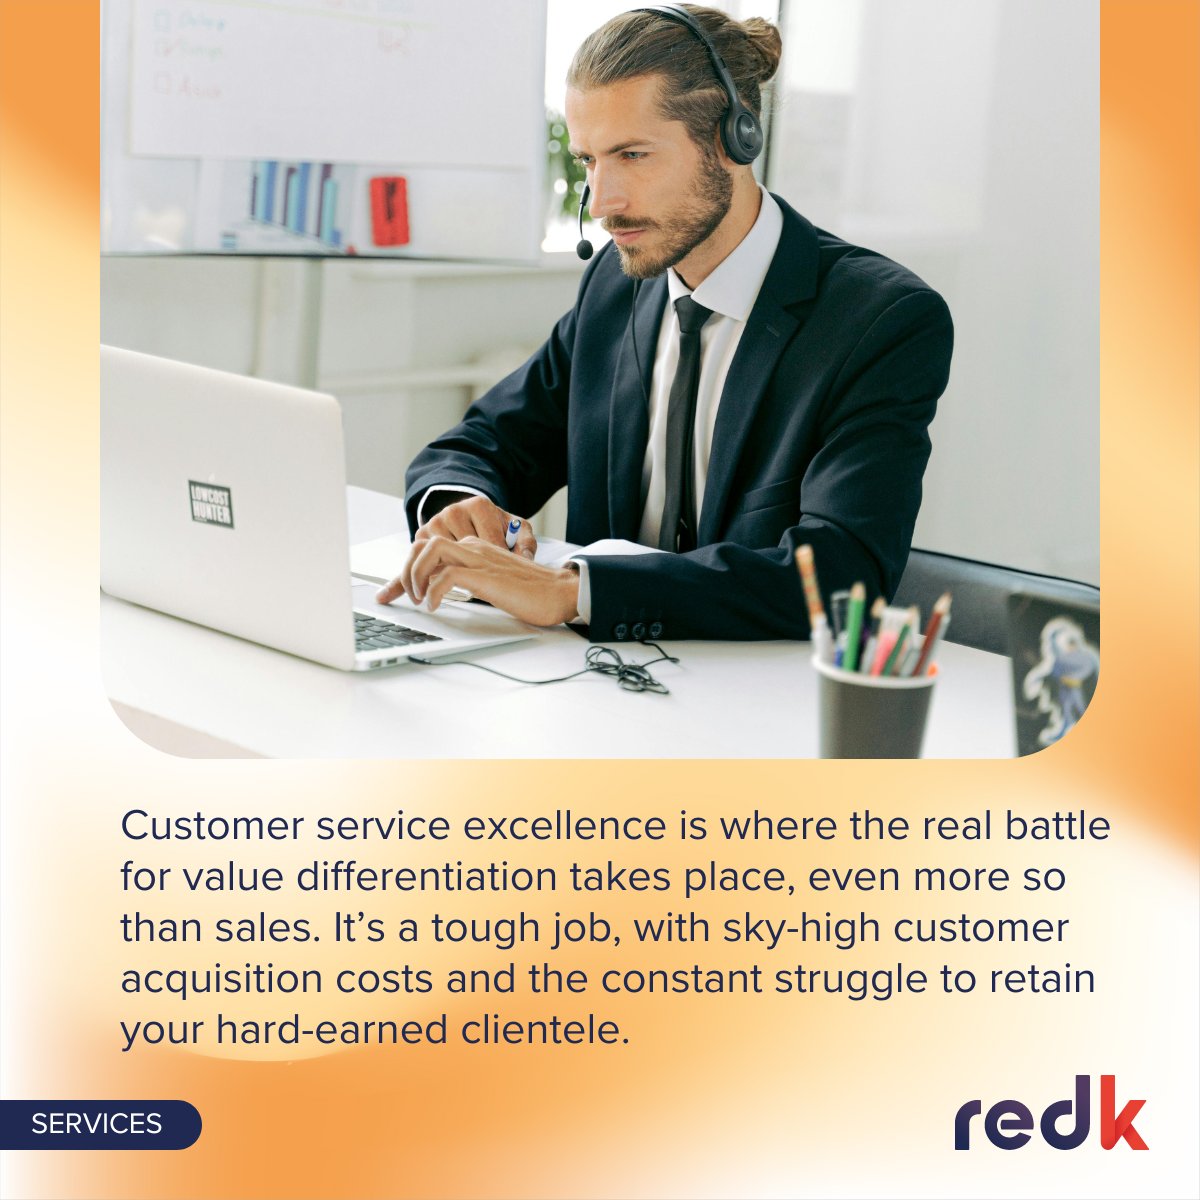 How do you rise above the competition? 🏆

Simple—deliver an excellent customer service experience. 

Learn more: okt.to/1vmI5k

#CustomerServiceExcellence #CustomerService